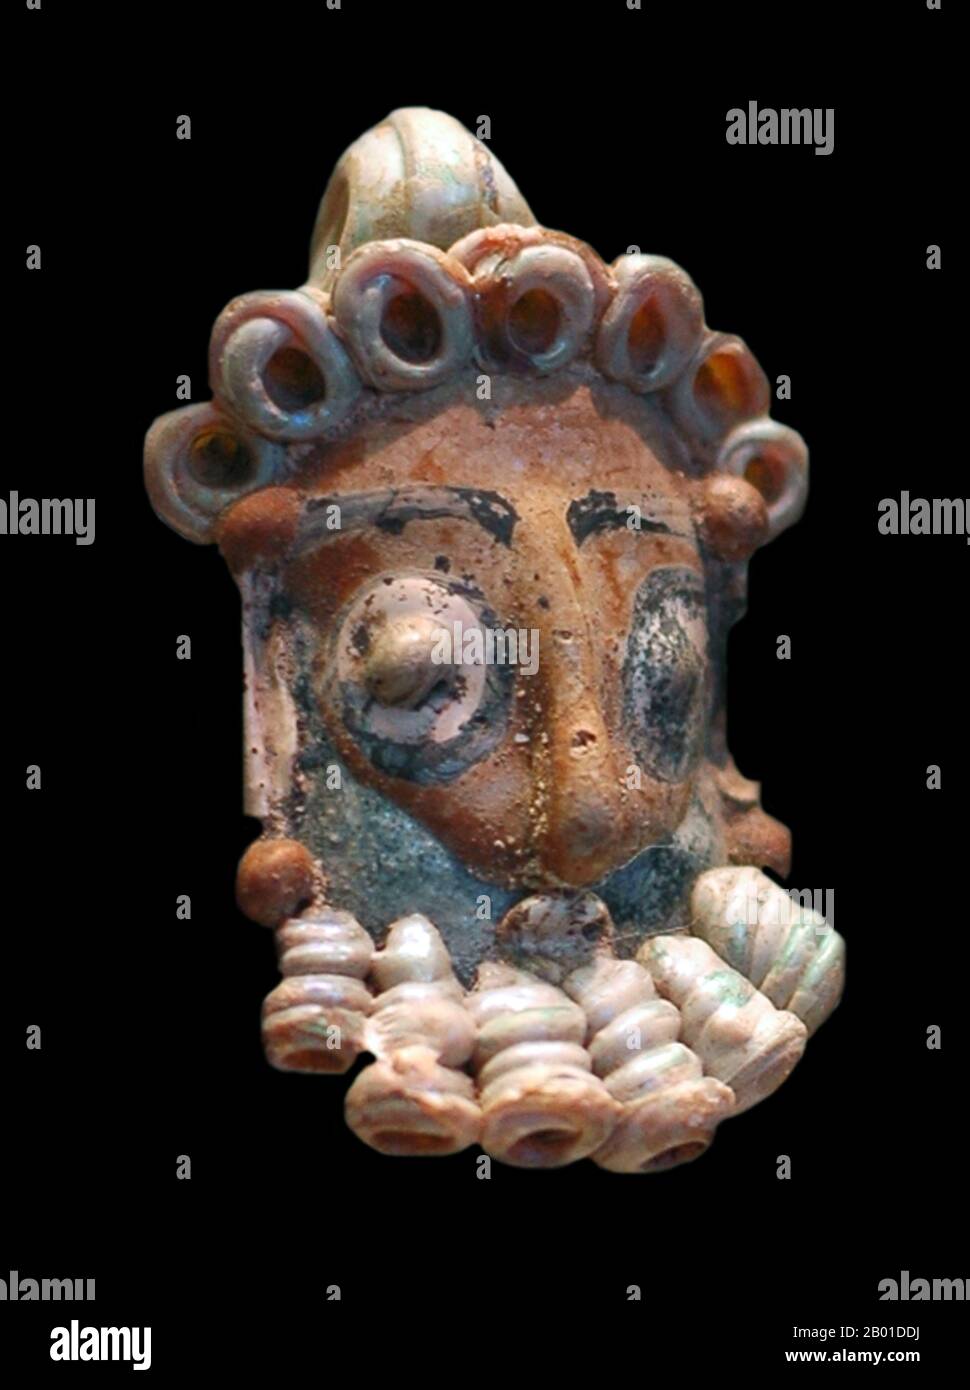 Tunisia: Head of a bearded man, coloured glass, Carthage, 4th-3rd centuries BCE.  The head was possibly a pendant or part of a necklace  Carthage (Latin: Carthago or Karthago, Ancient Greek: Karkhēdōn, Arabic: Qarṭāj, Berber: Kartajen, meaning New City) is a major urban centre that has existed for nearly 3,000 years on the Gulf of Tunis, developing from a Phoenician colony of the 1st millennium BCE.  The first civilisation that developed within the city's sphere of influence is referred to as Punic (a form of the word Phoenician) or Carthaginian. Stock Photo